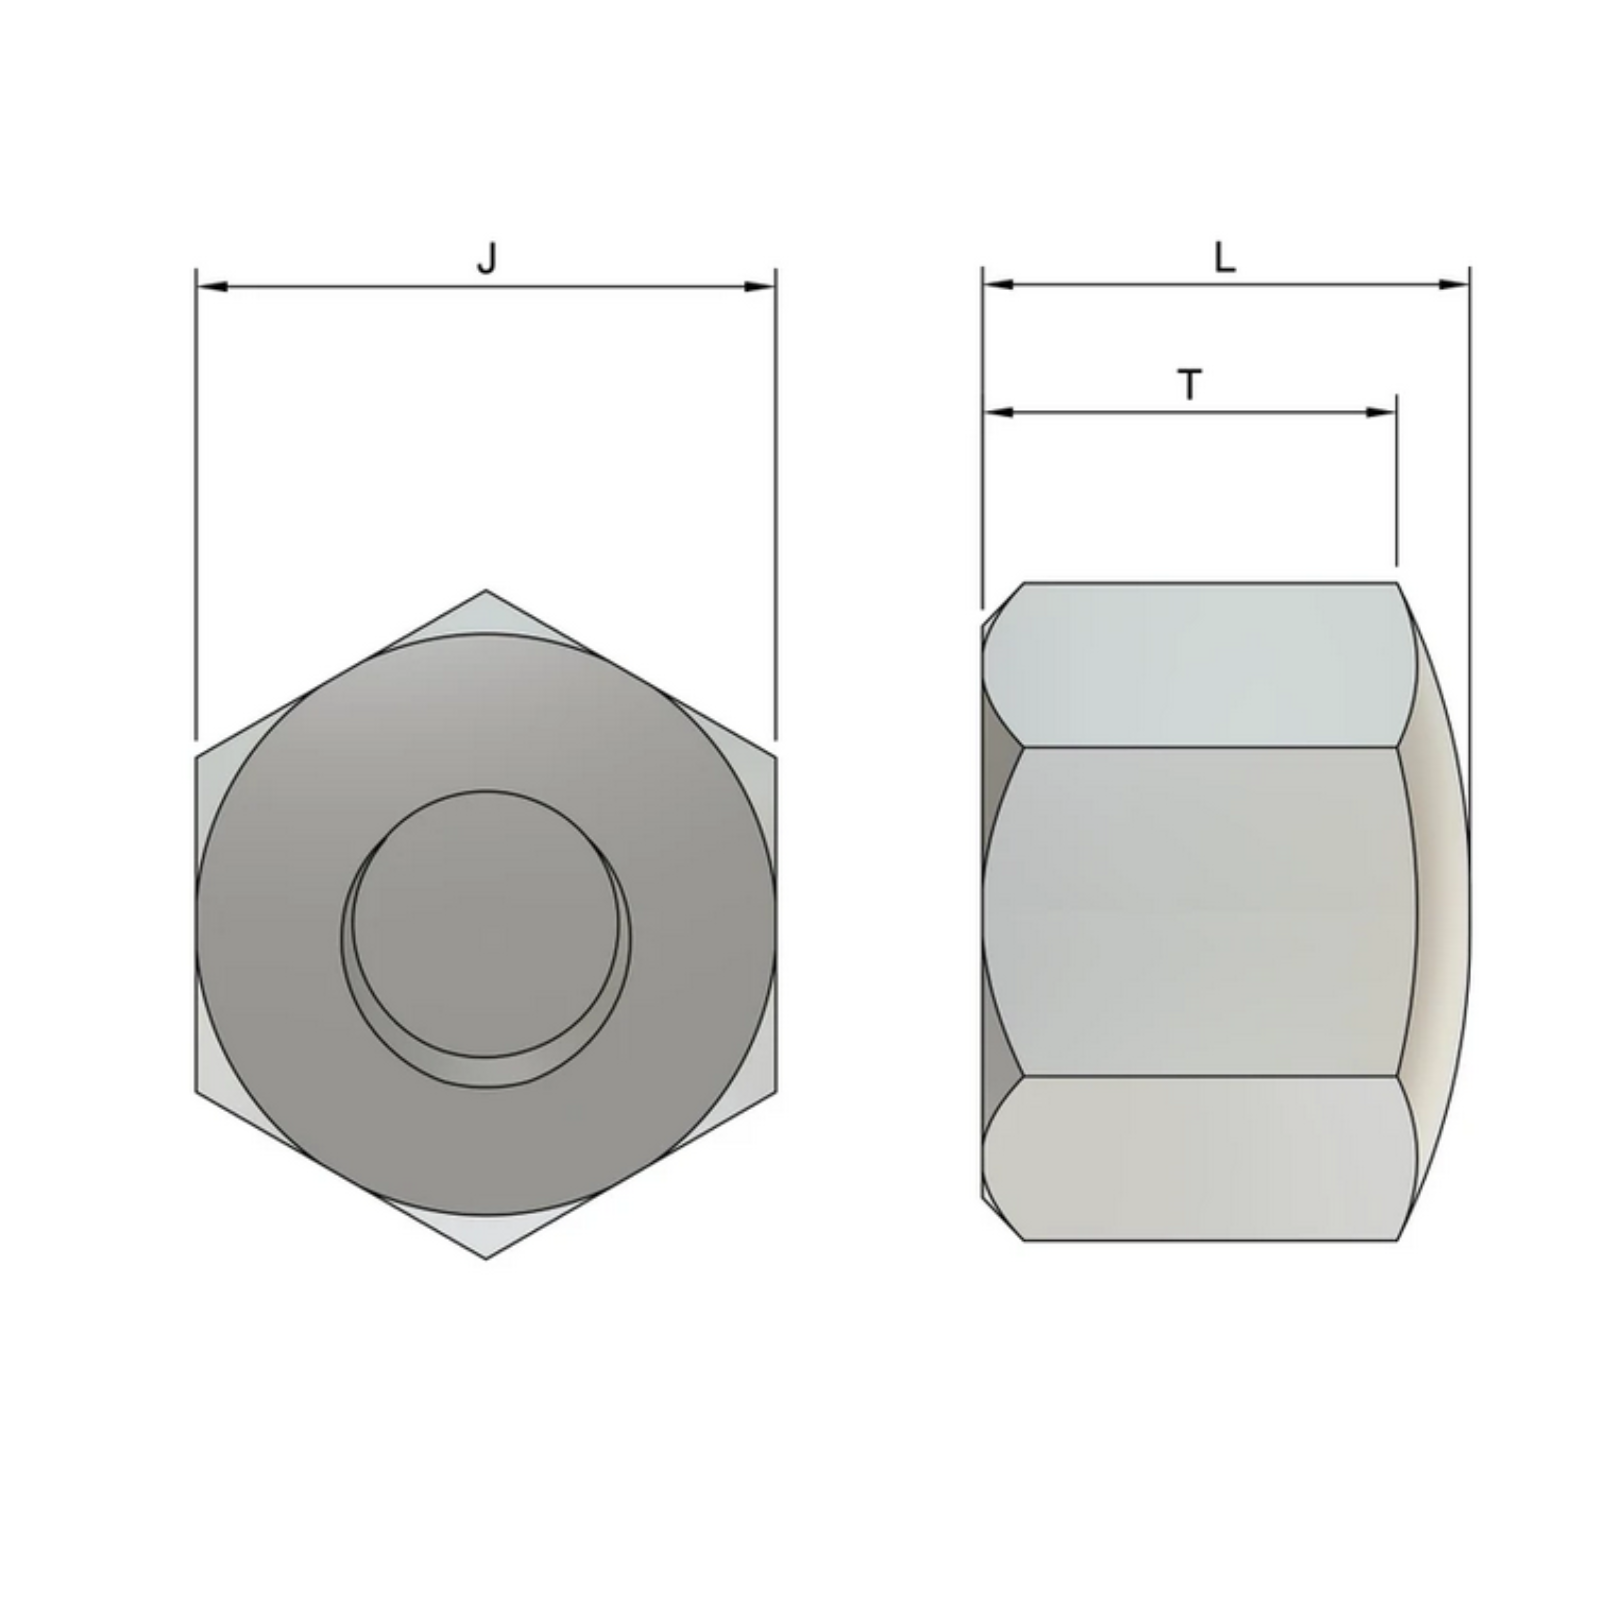 M8 Cap Nuts (DIN 917) - Stainless Steel (A4)